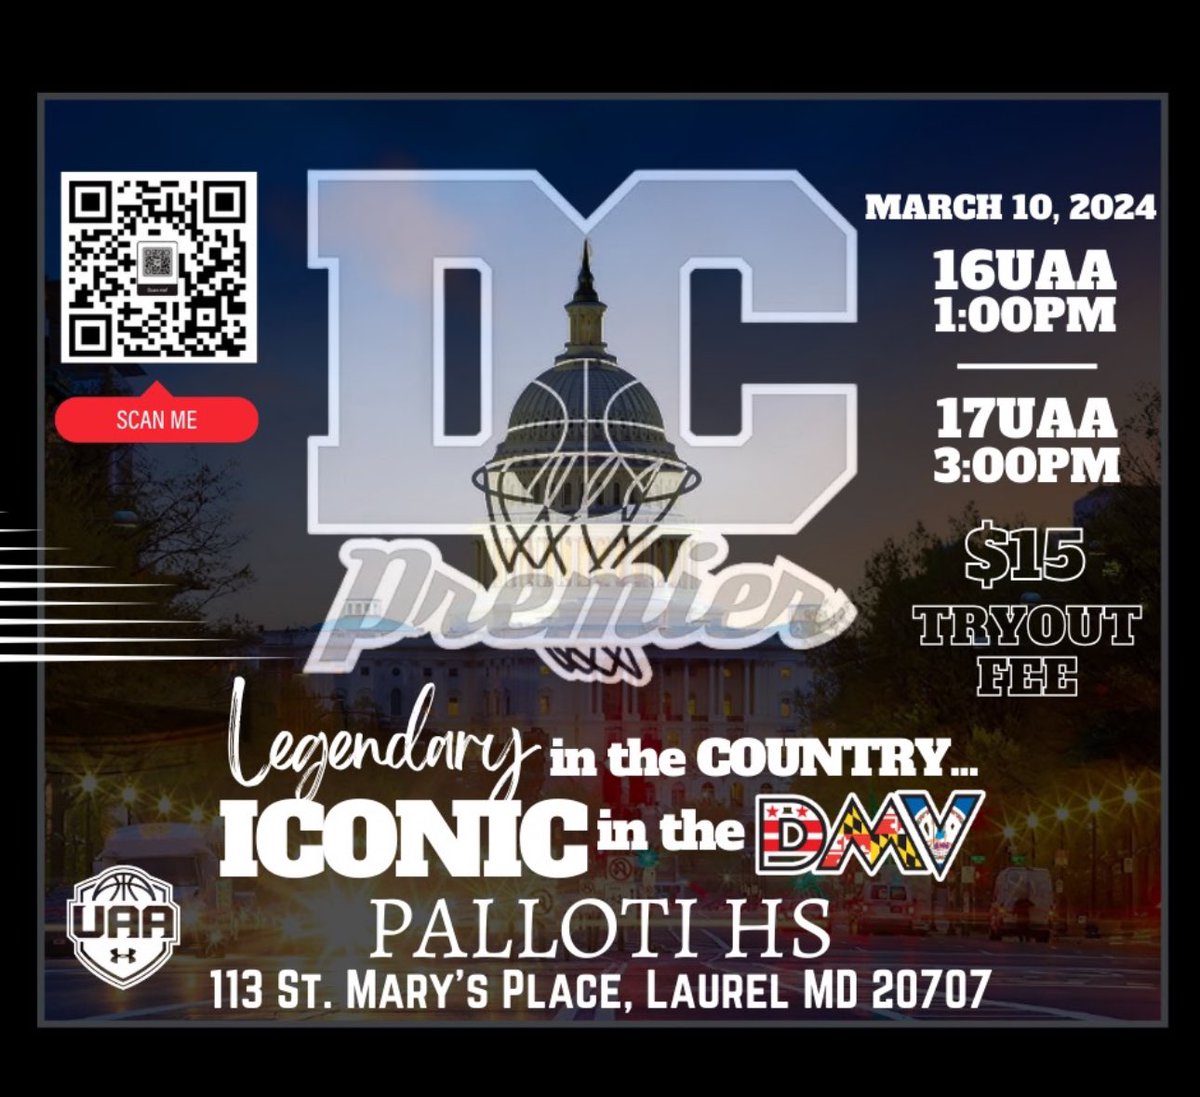 Tomorrow the journey begins!!! @DC_Premier_ hitting the ground running